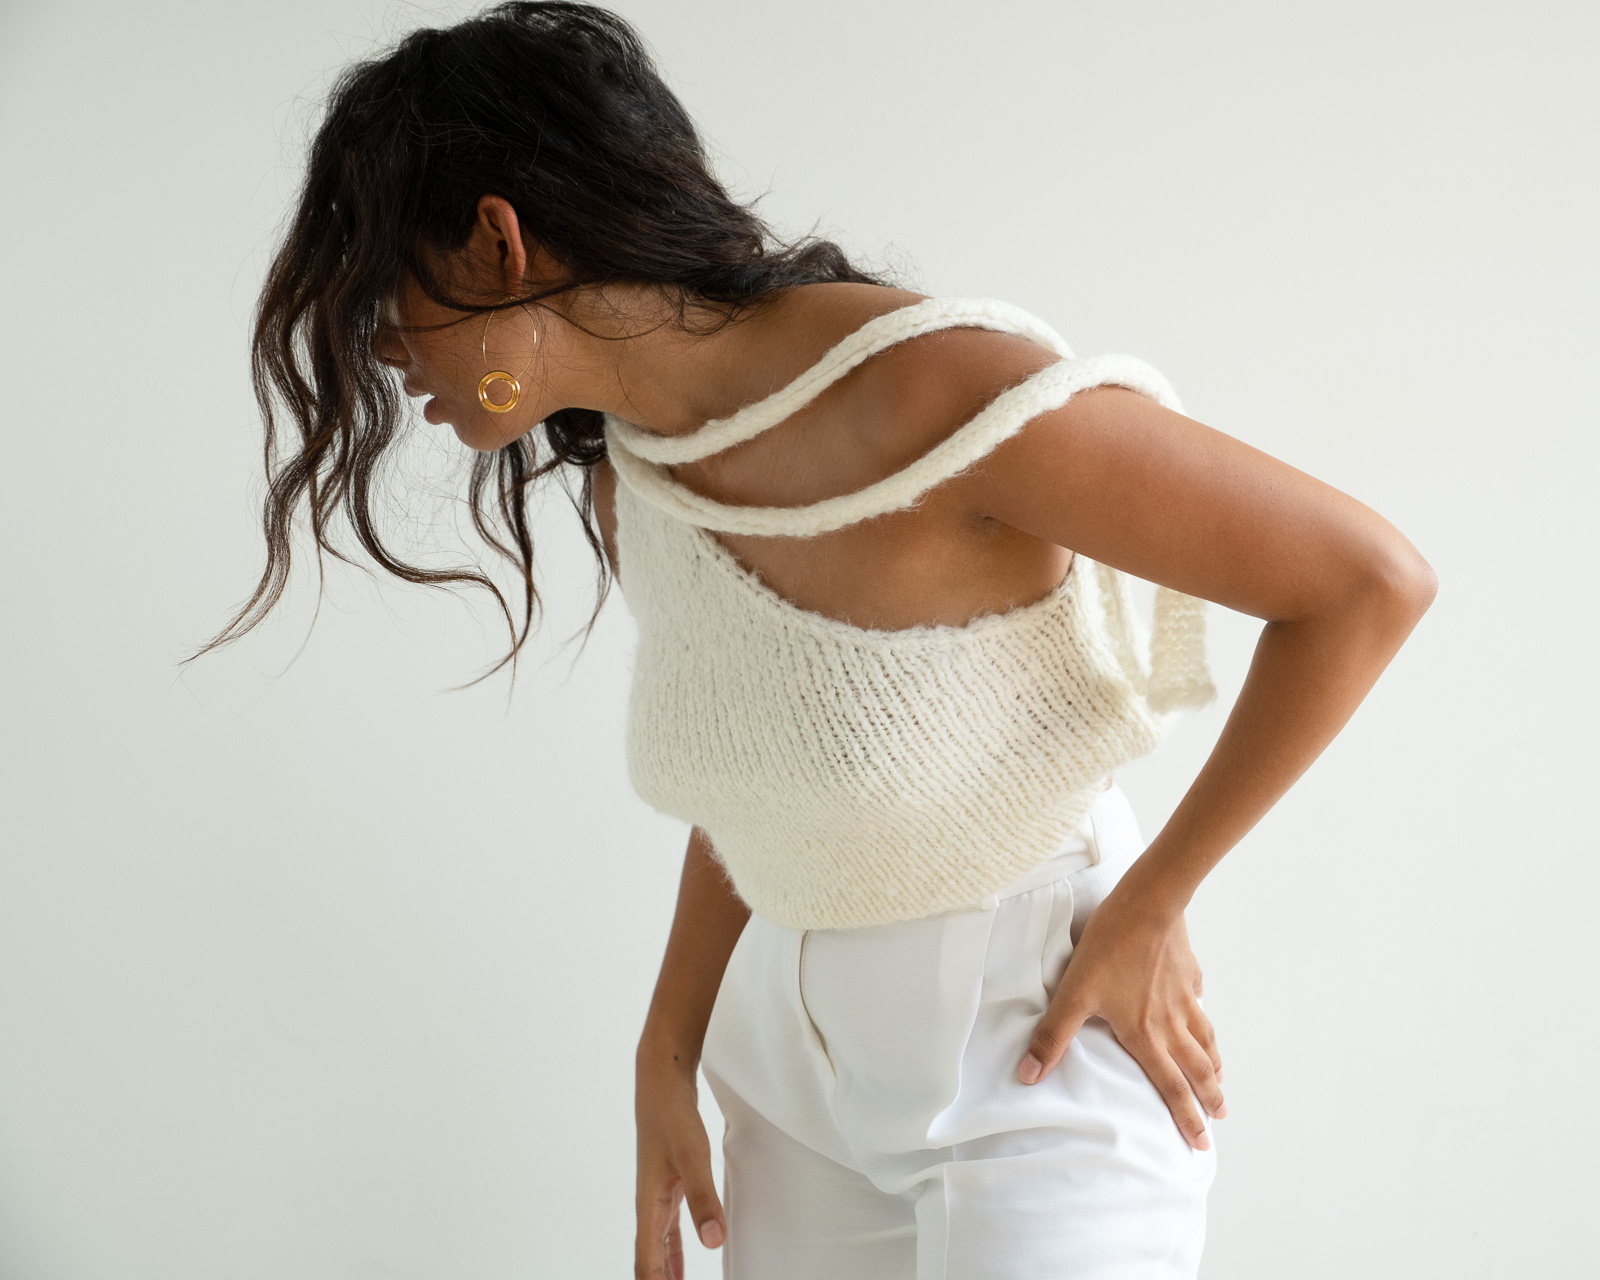 Storm wes wears malaika Raiss white pants combined with knit top and gold earrings detail shot 